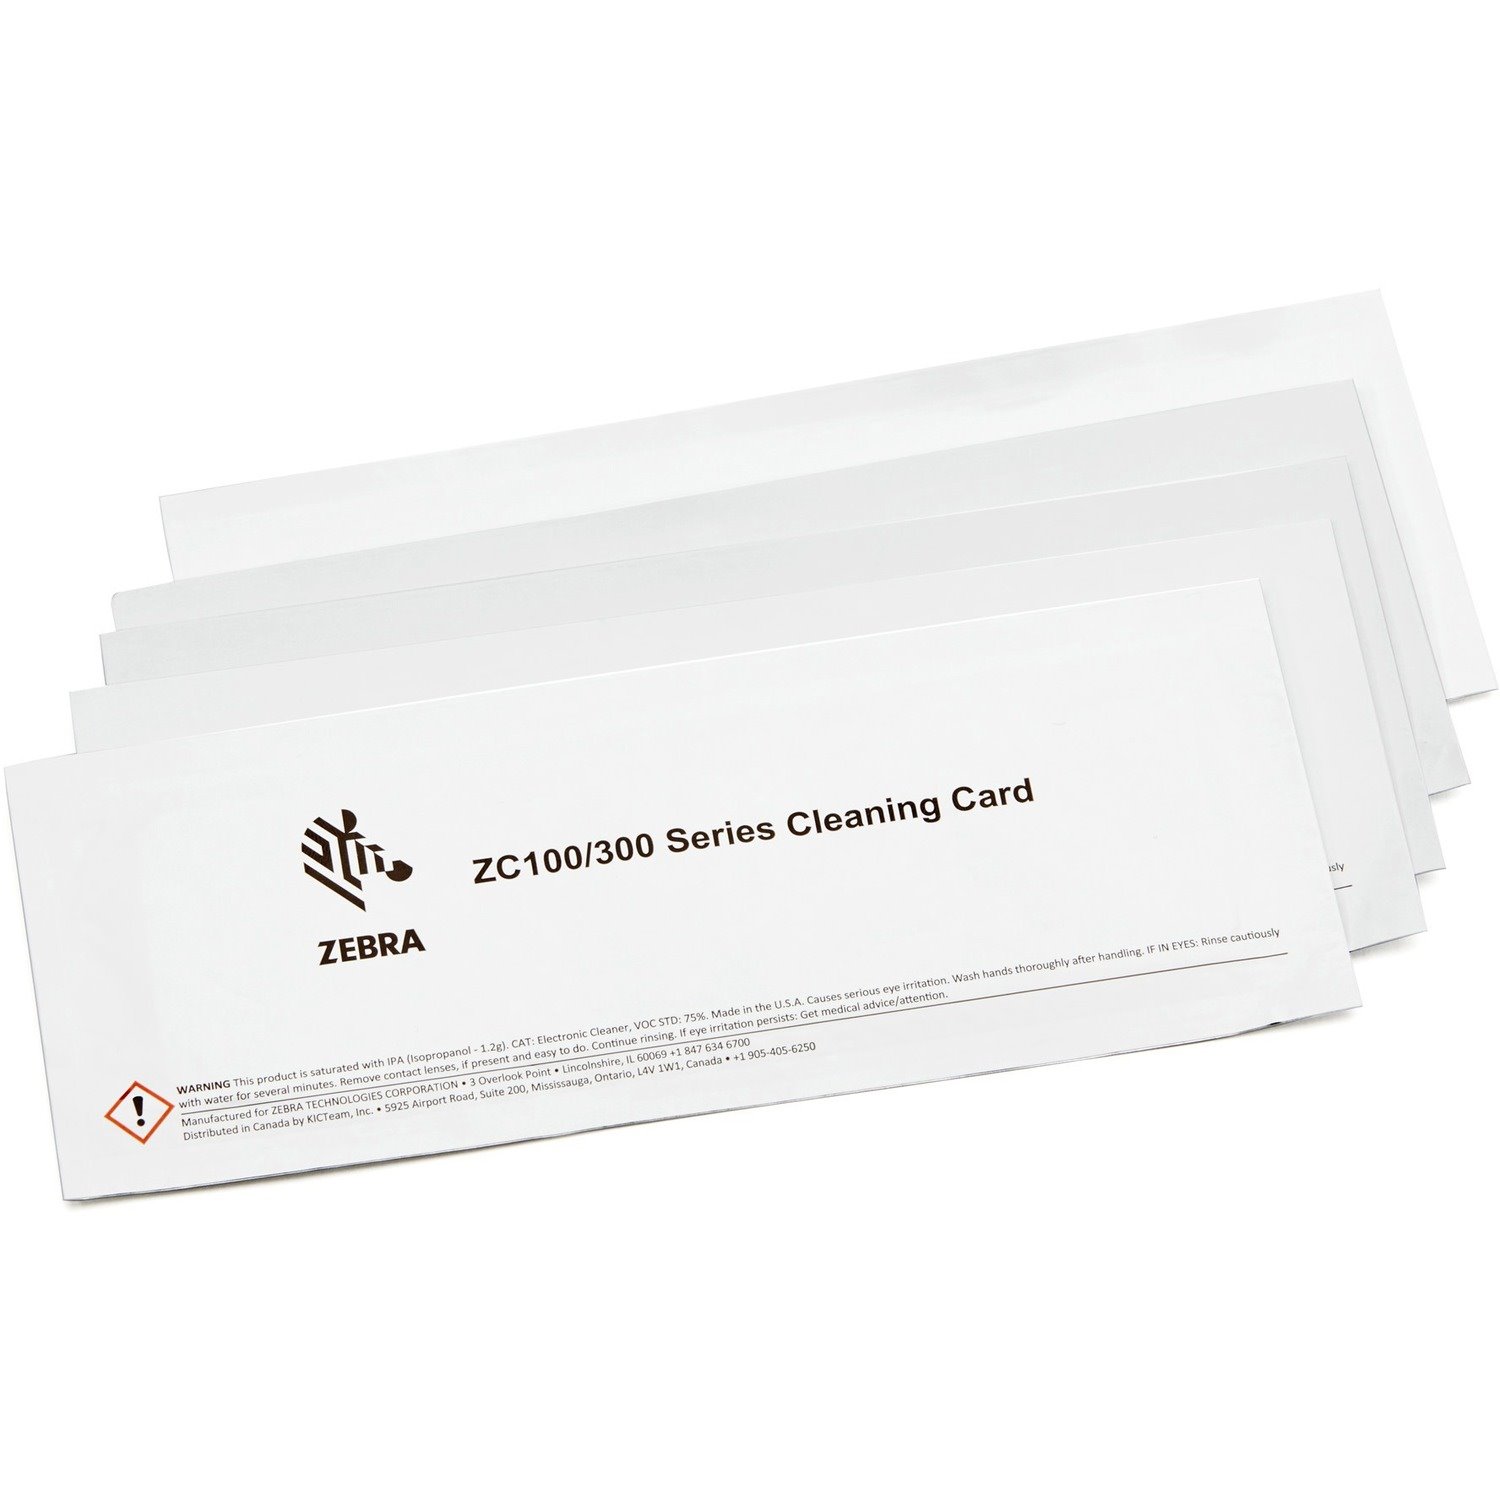 Zebra Cleaning Card Kit (Improved), ZC100/300, 5 Cards